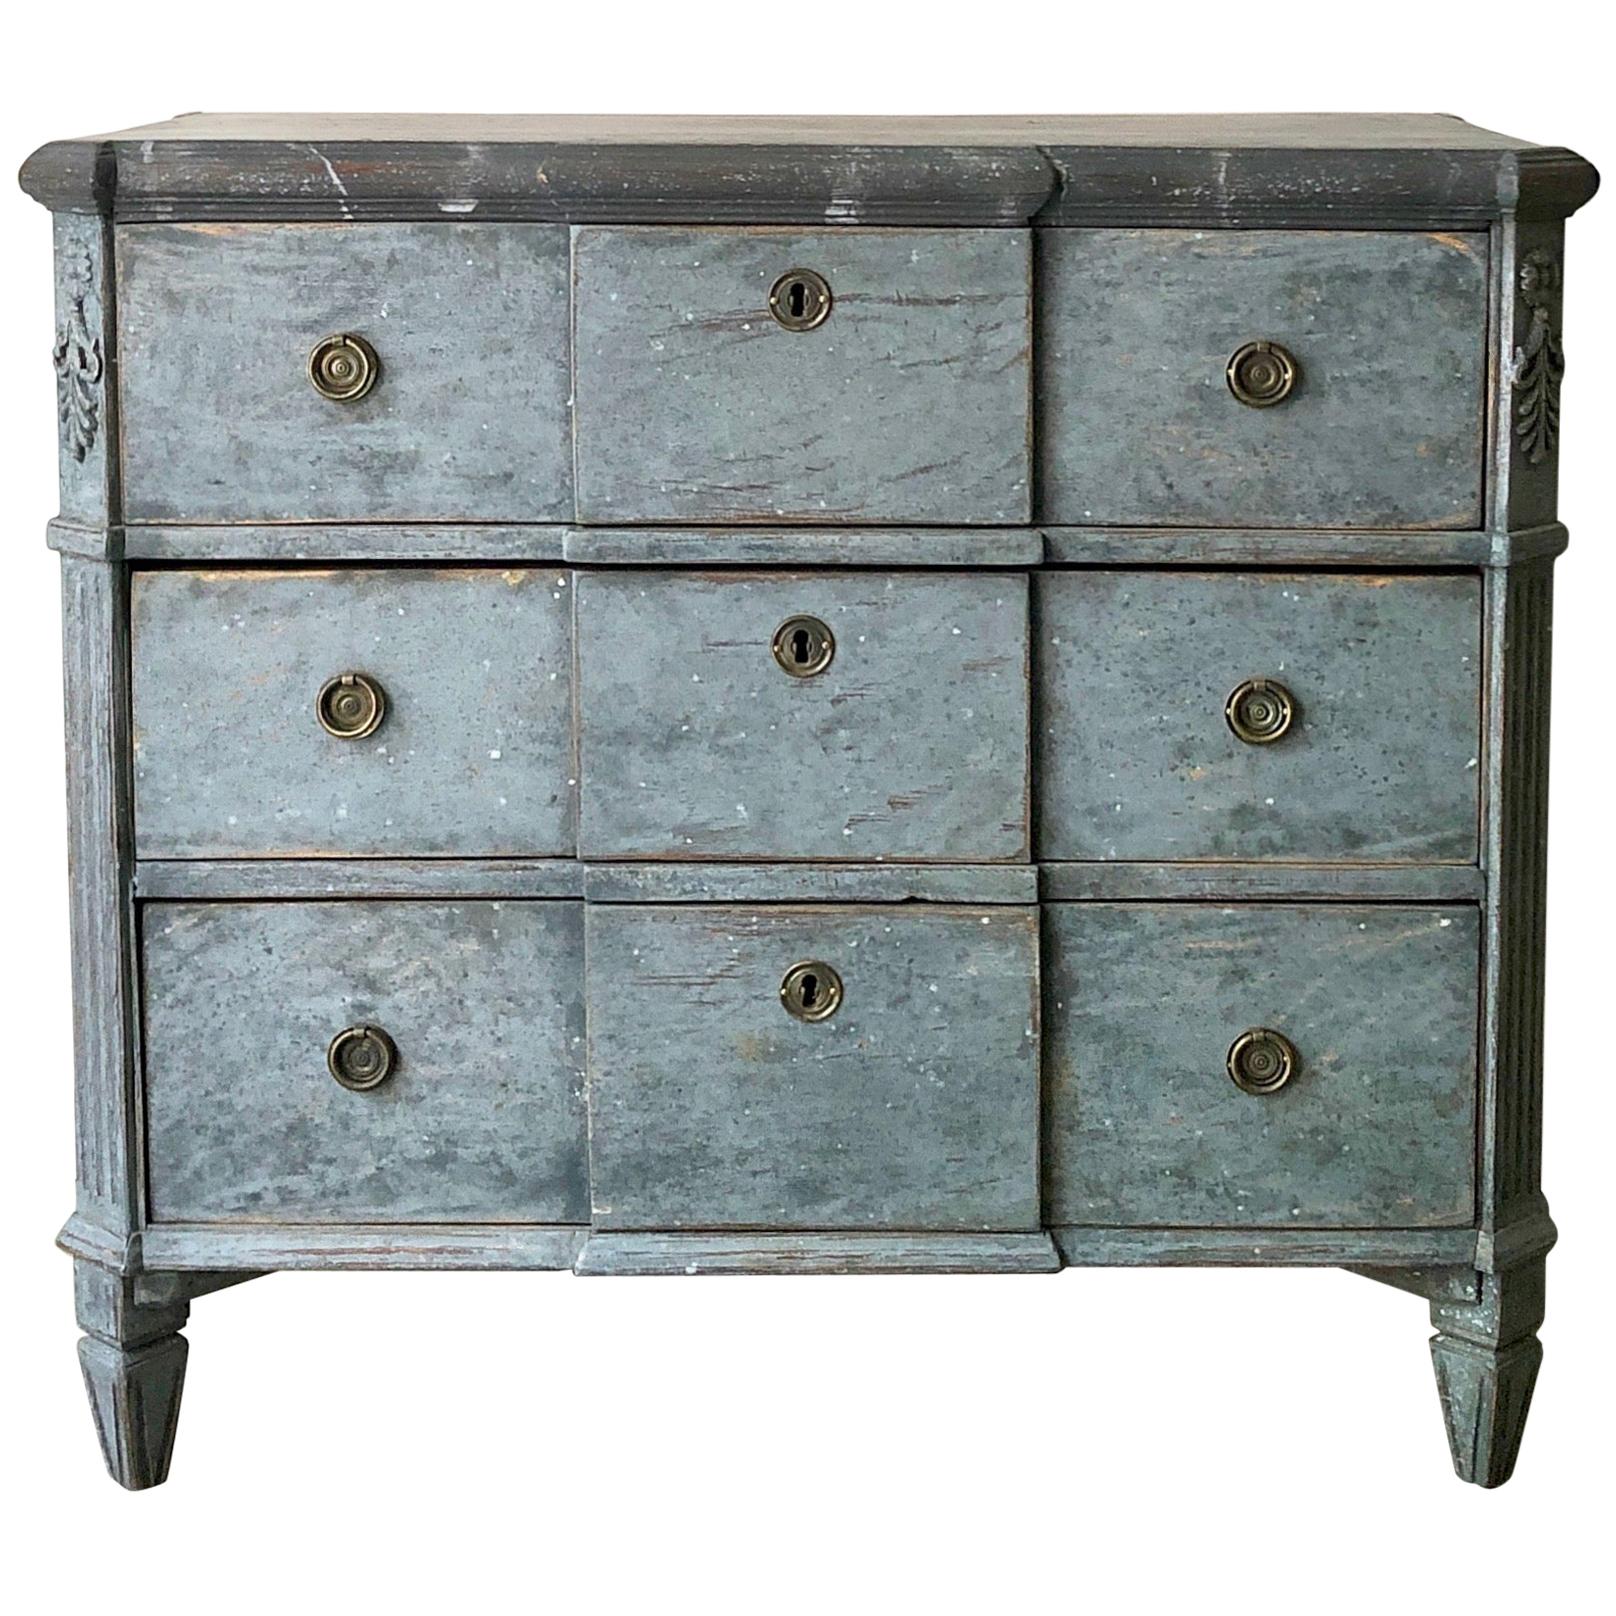 19th Century Swedish Painted Chest of Drawers